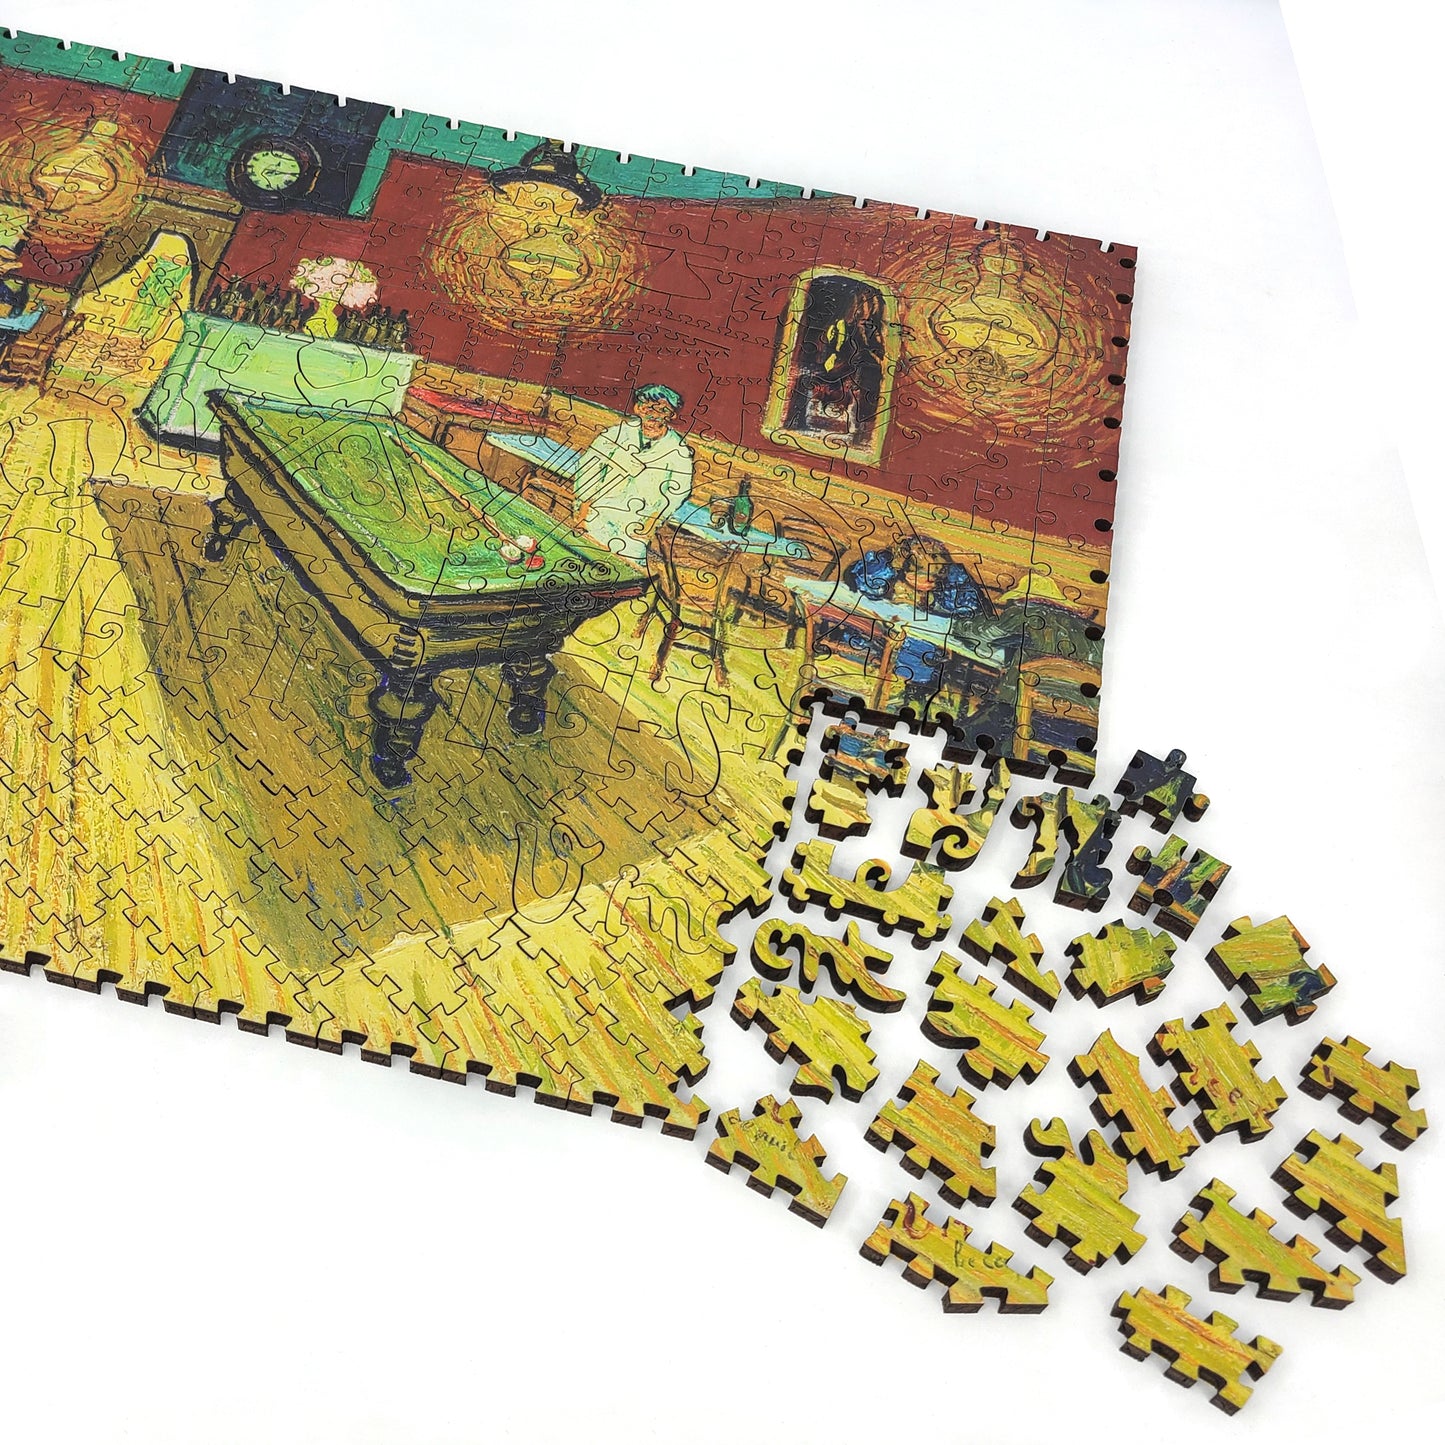 Wooden Jigsaw Puzzle with Uniquely Shaped Pieces for Adults - 330 Pieces - The Night Café